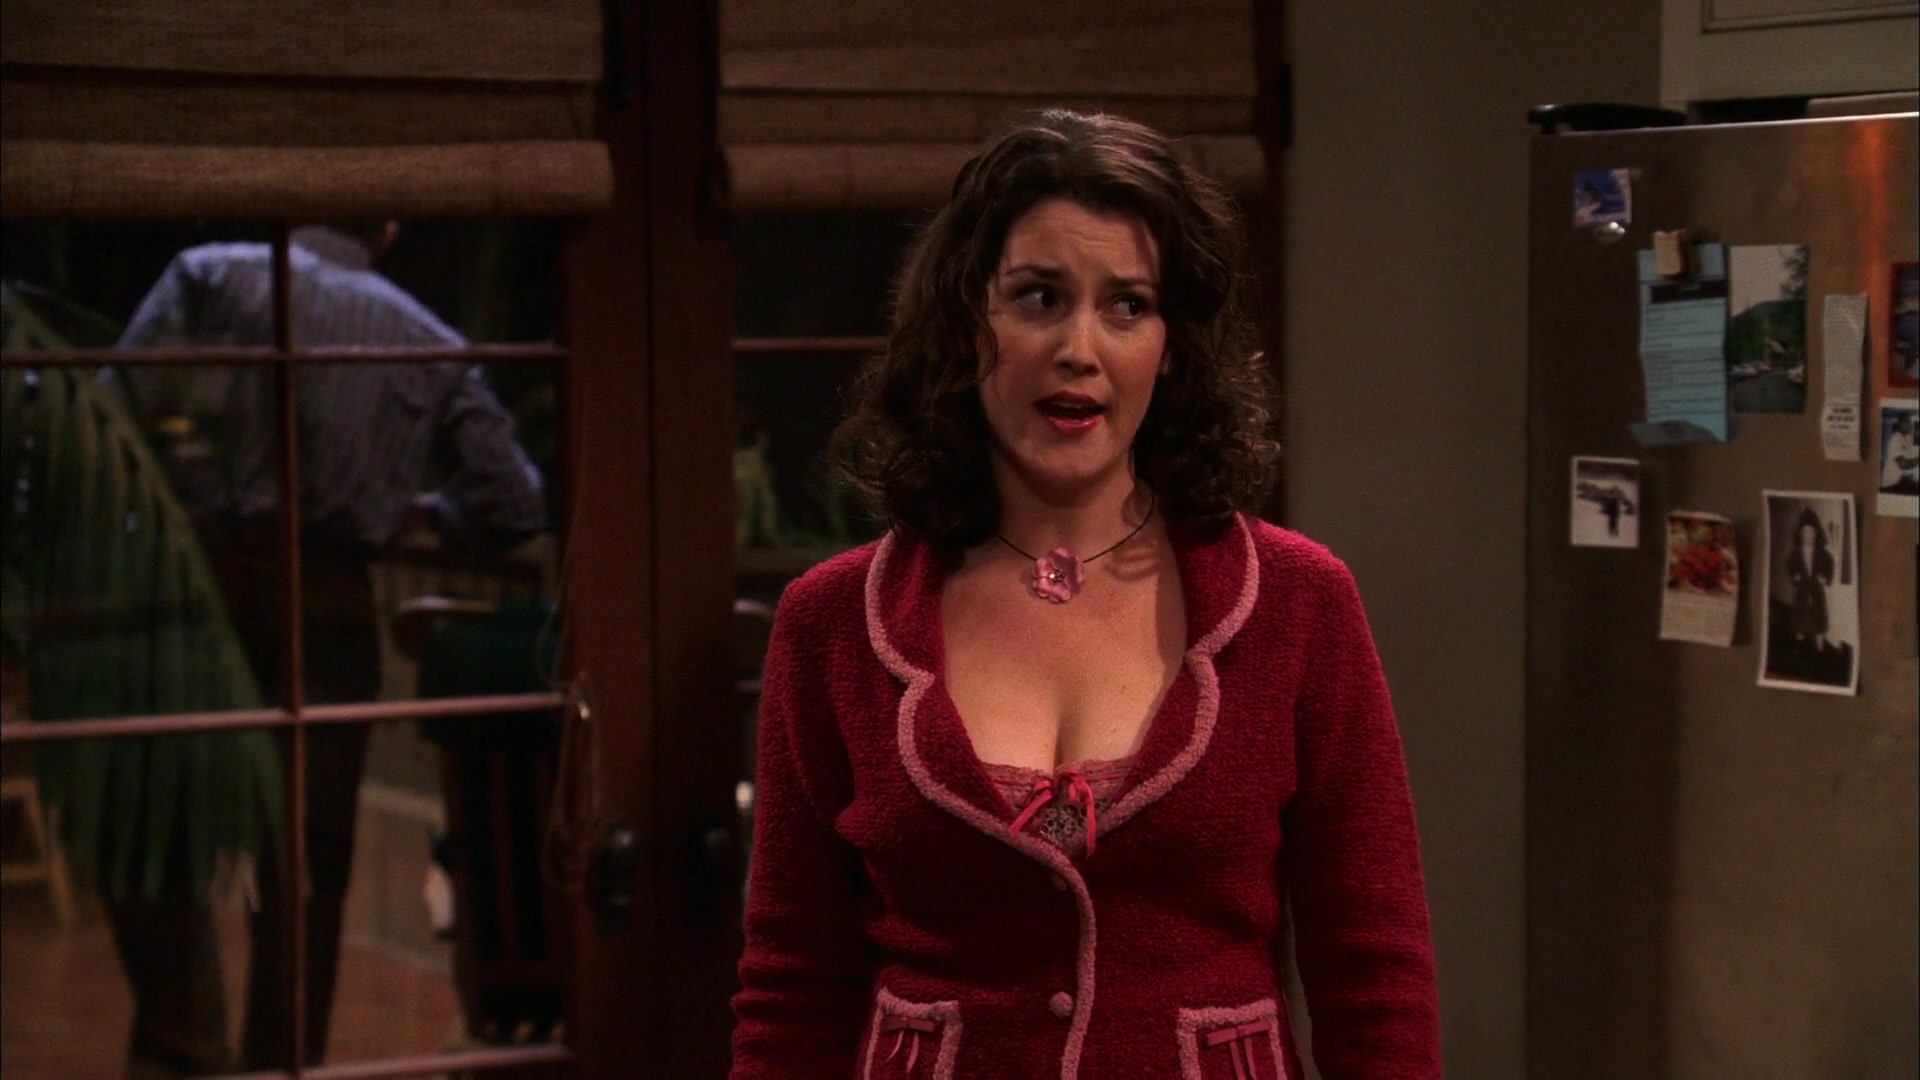 Melanie Lynskey cleavage scenes for Two and Half Man